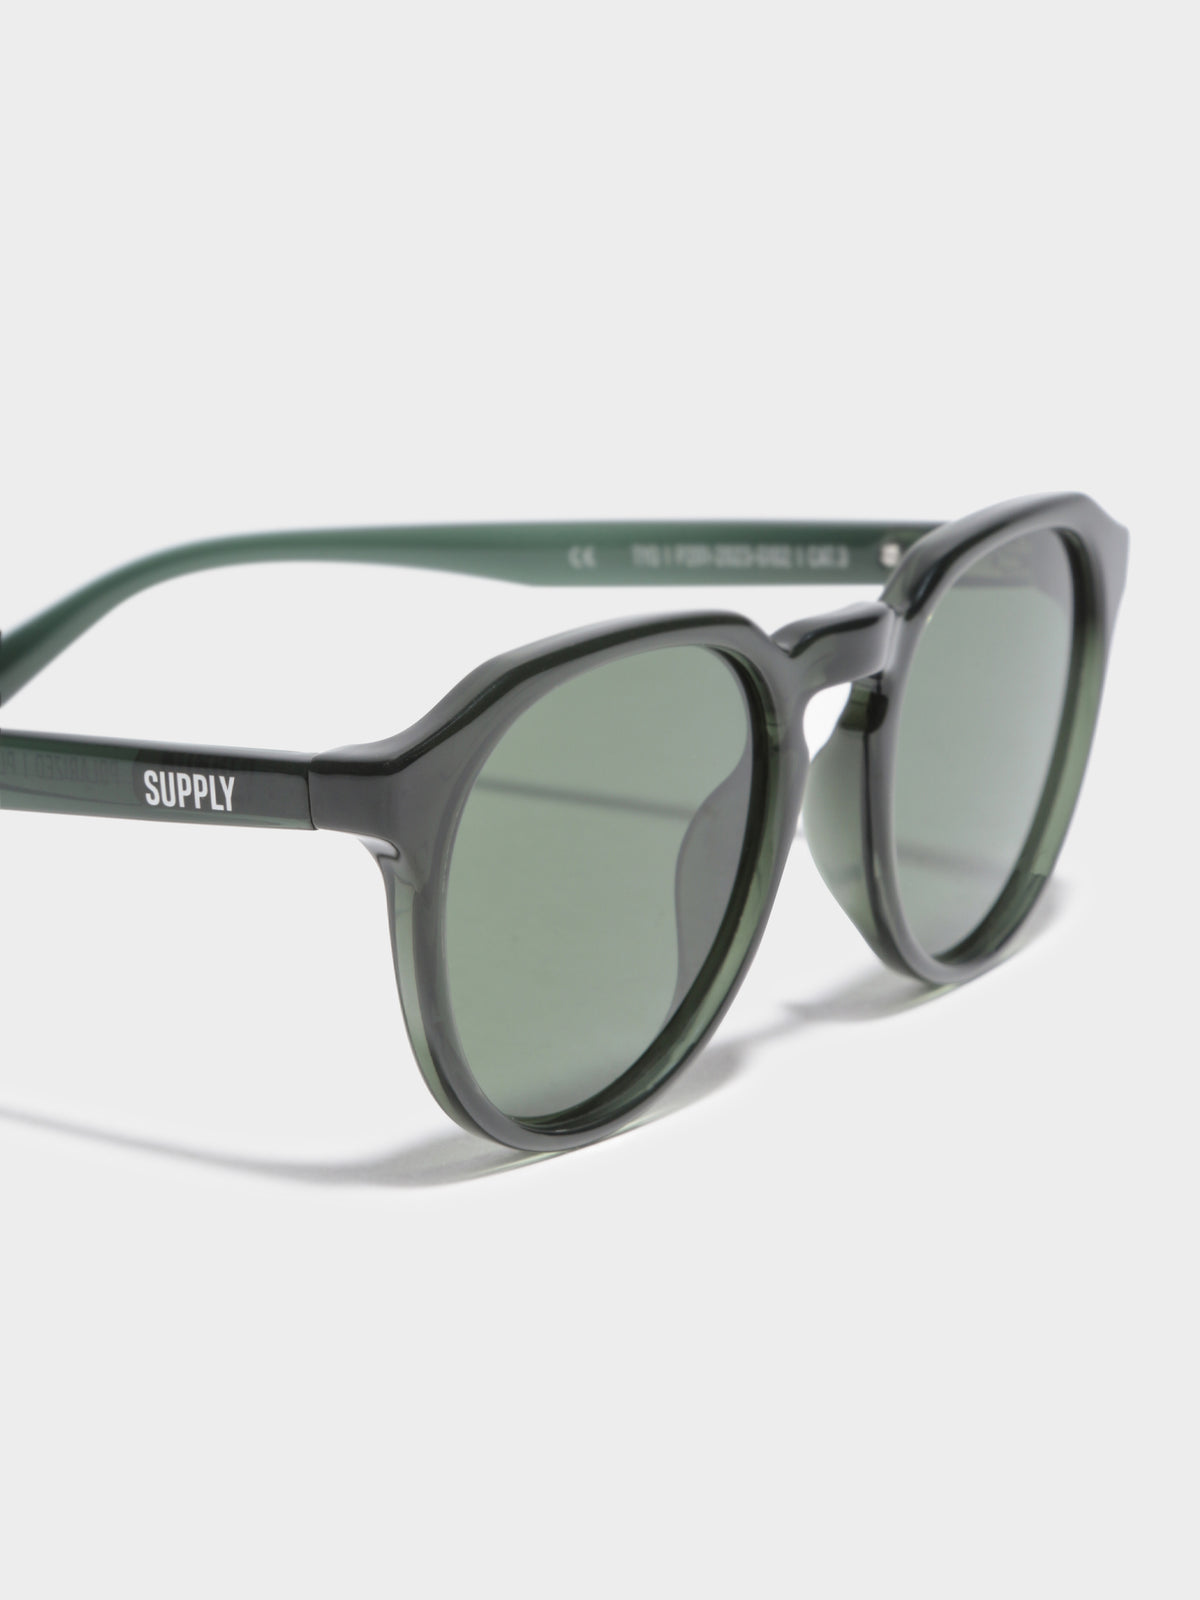 TYO Polarised Sunglasses in Polished Forest Green